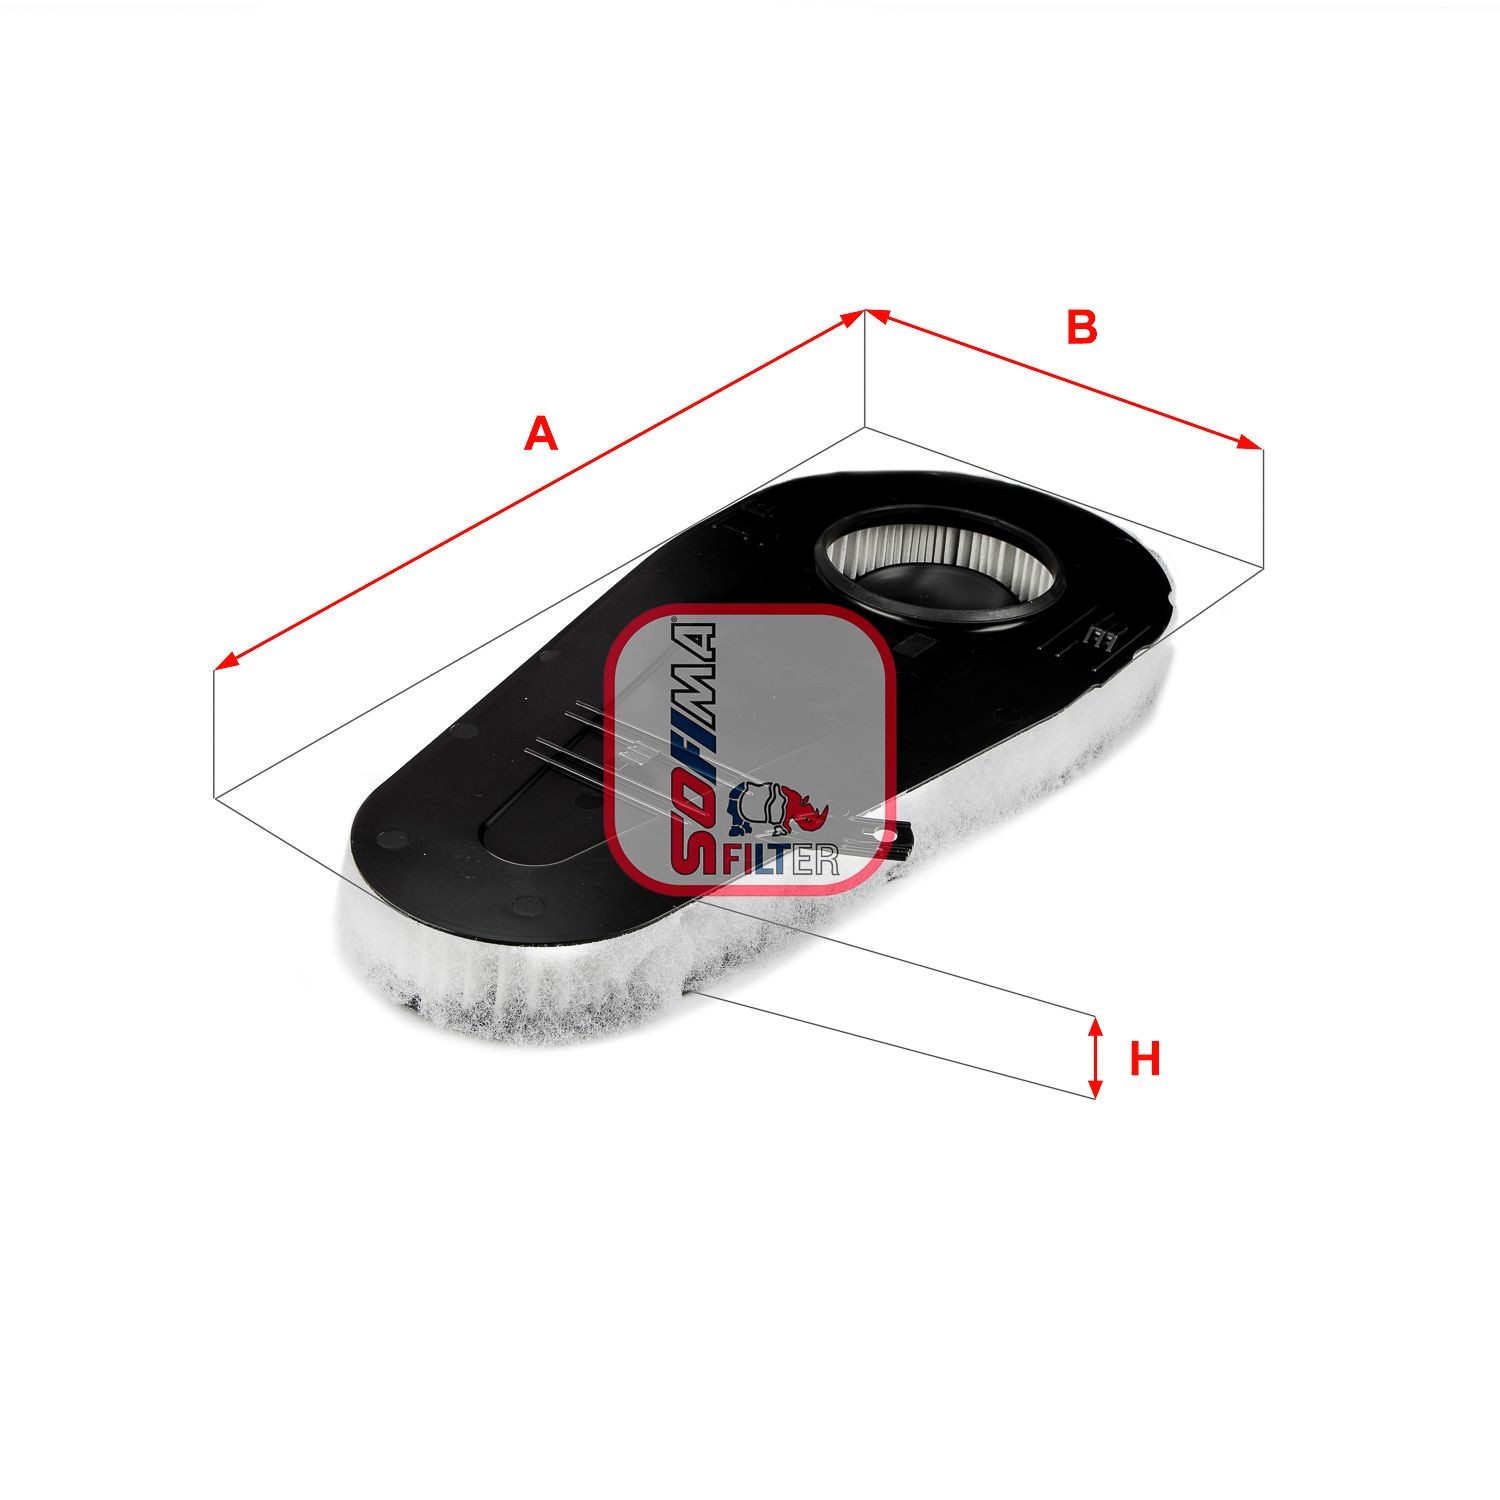 SOFIMA 50mm, 231mm, 506mm, Filter Insert Length: 506mm, Width: 231mm, Height: 50mm Engine air filter S 7A97 A buy